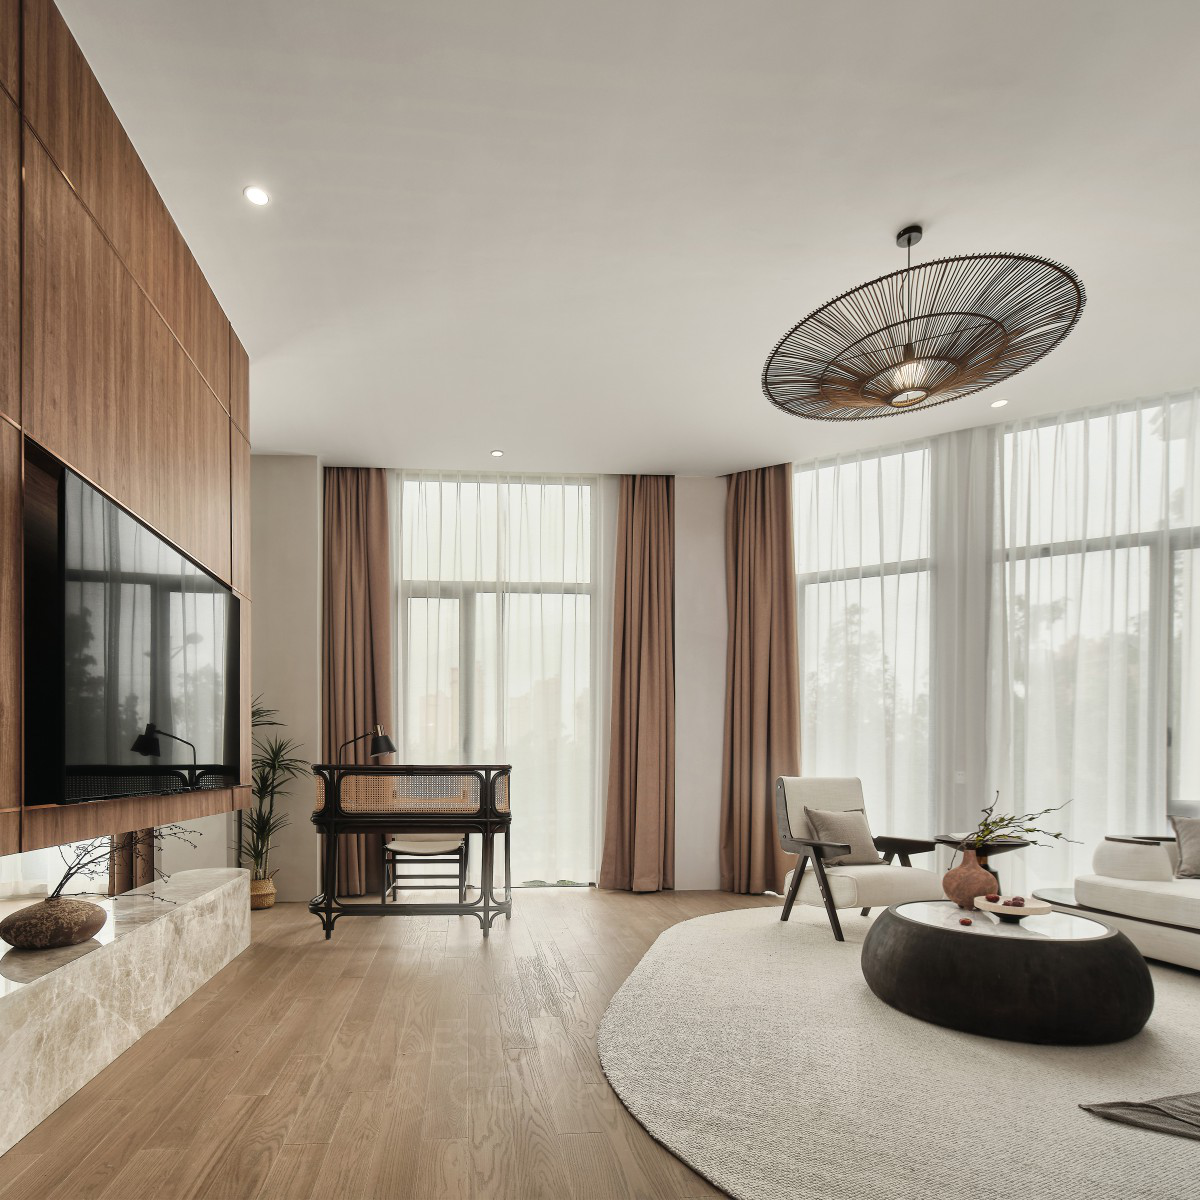 Light and Shadow Design wins Bronze at the prestigious A' Interior Space, Retail and Exhibition Design Award with Shanghai Donggang Chengfu Residential Interior Design.